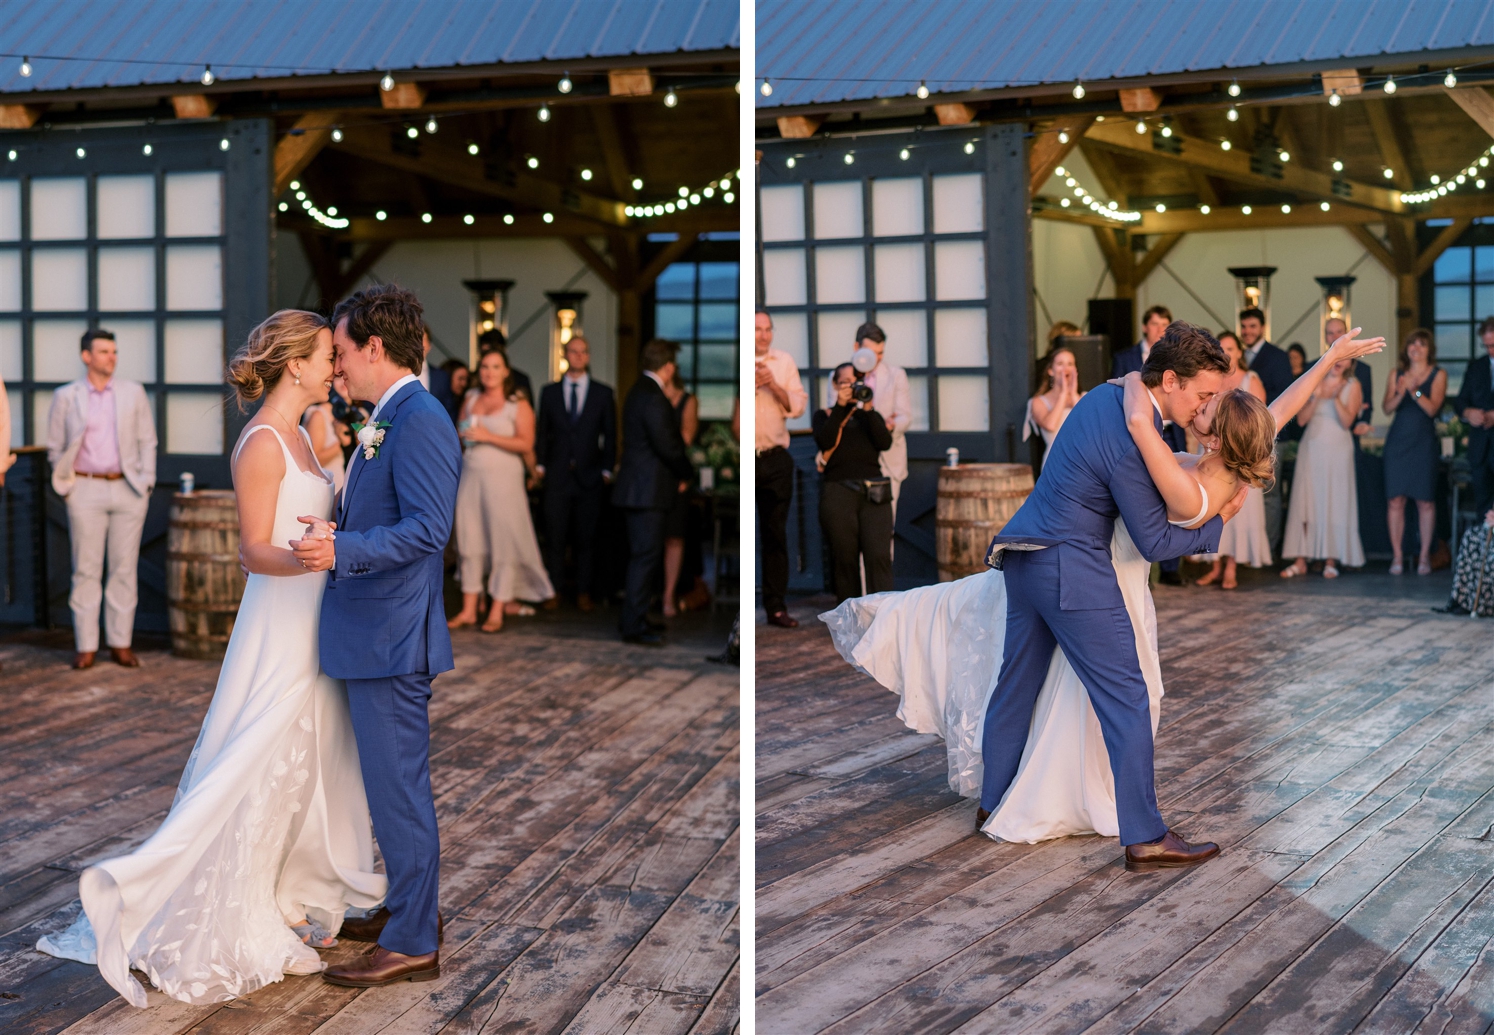 Couple’s first dance at Three Peaks Ranch | groom dipping bride after first dance | McArthur Weddings and Events